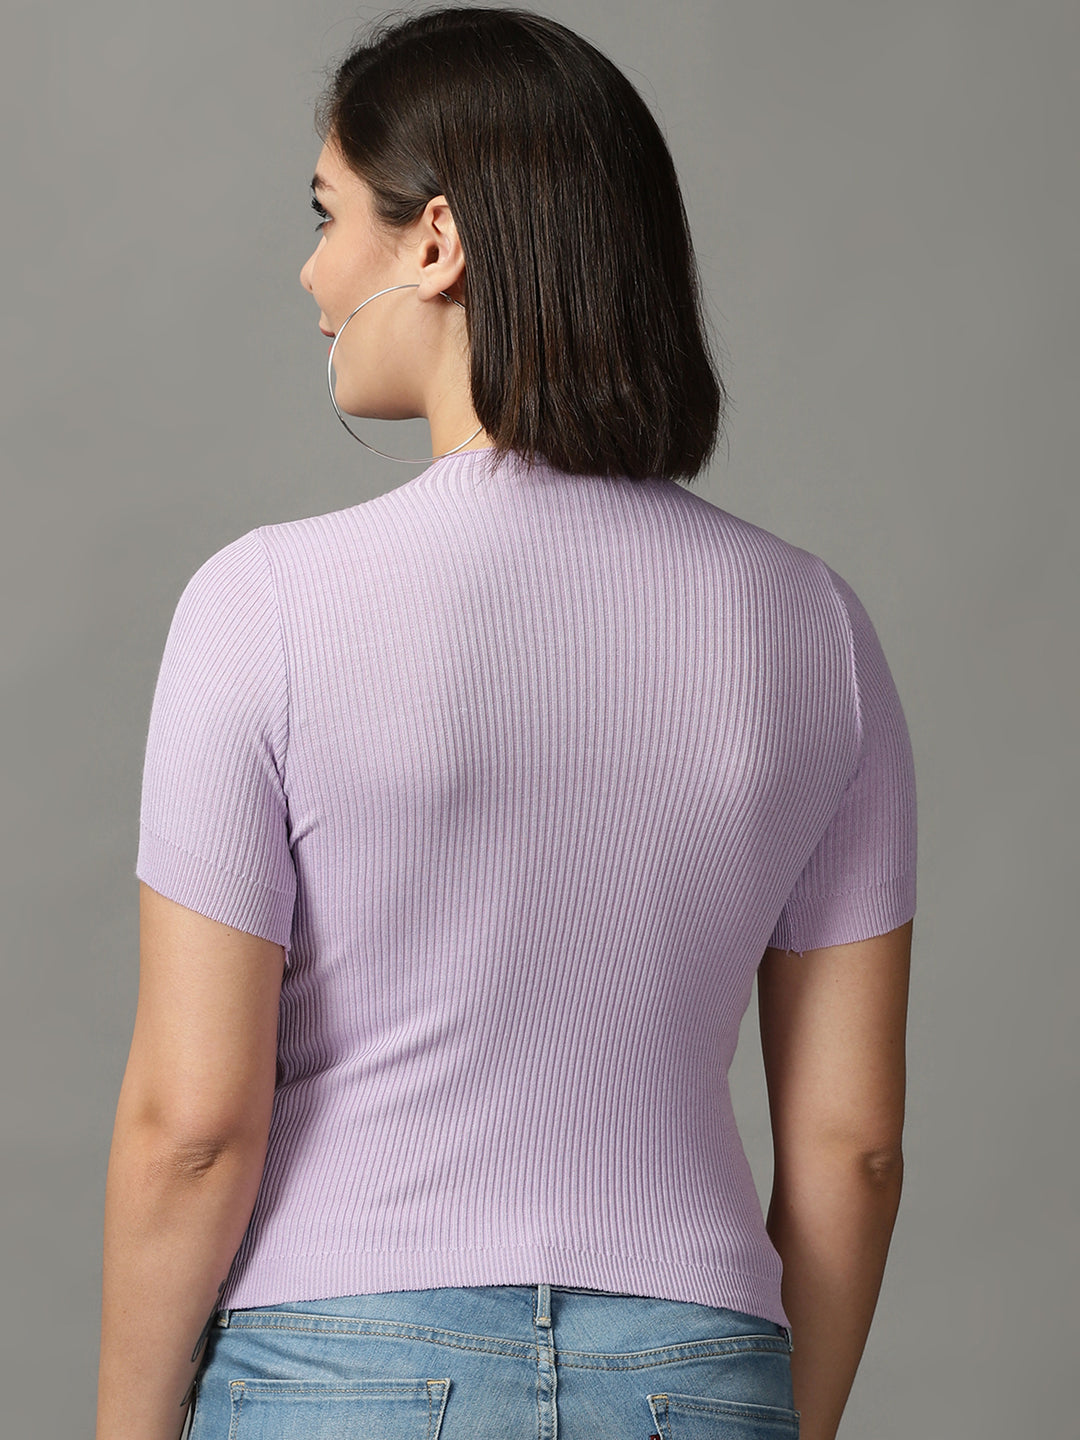 Women's Purple Solid Fitted Top